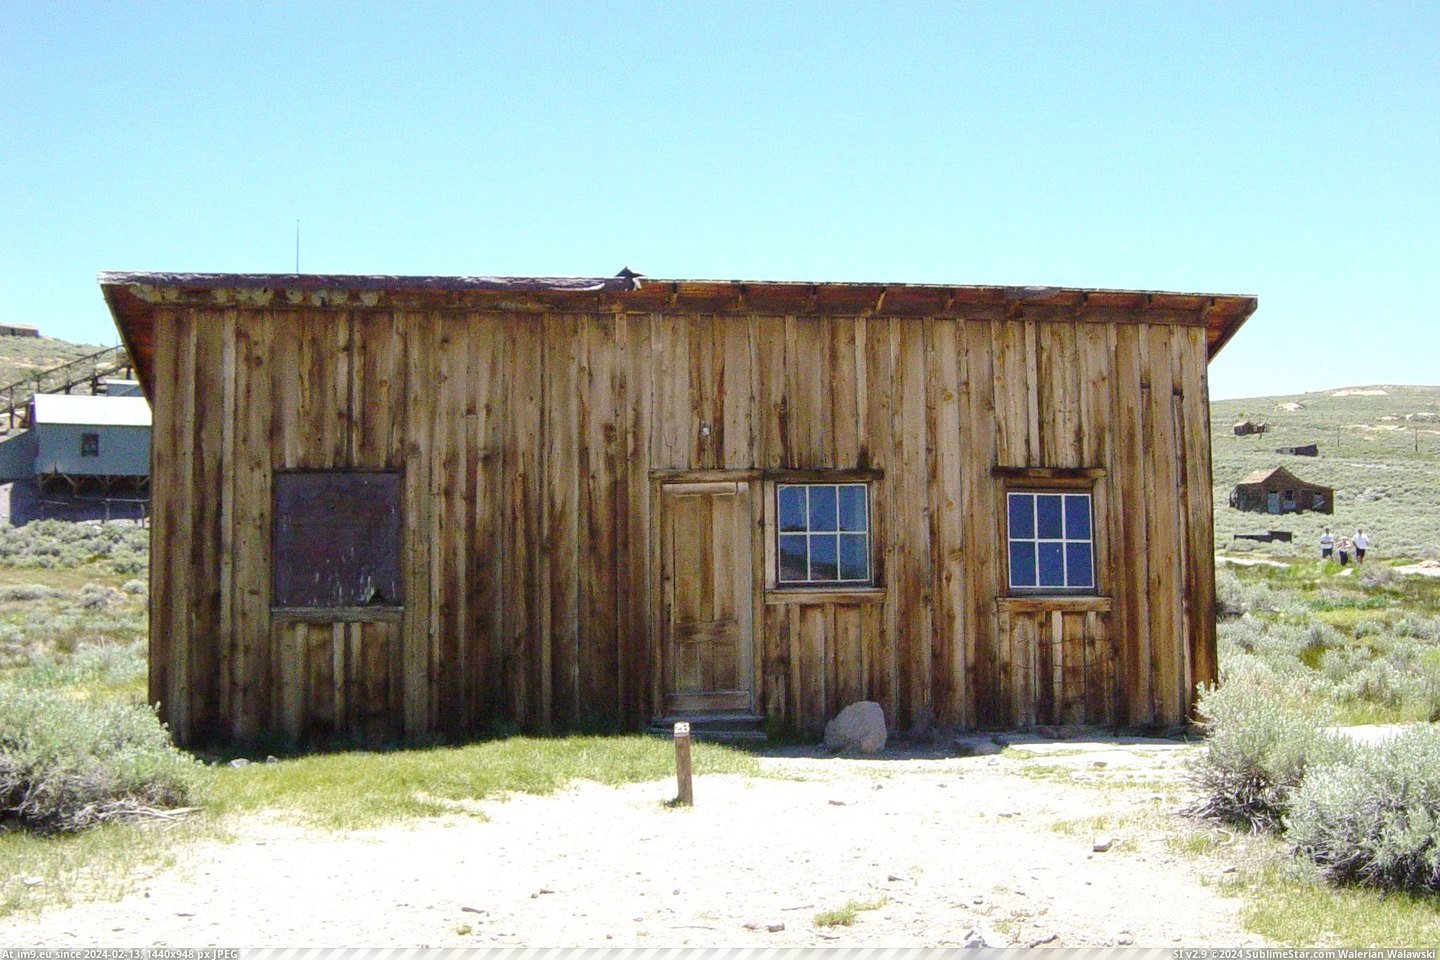 #California #Hall #Masonic #Site #Bodie Site Of Masonic Hall In Bodie, California Pic. (Obraz z album Bodie - a ghost town in Eastern California))